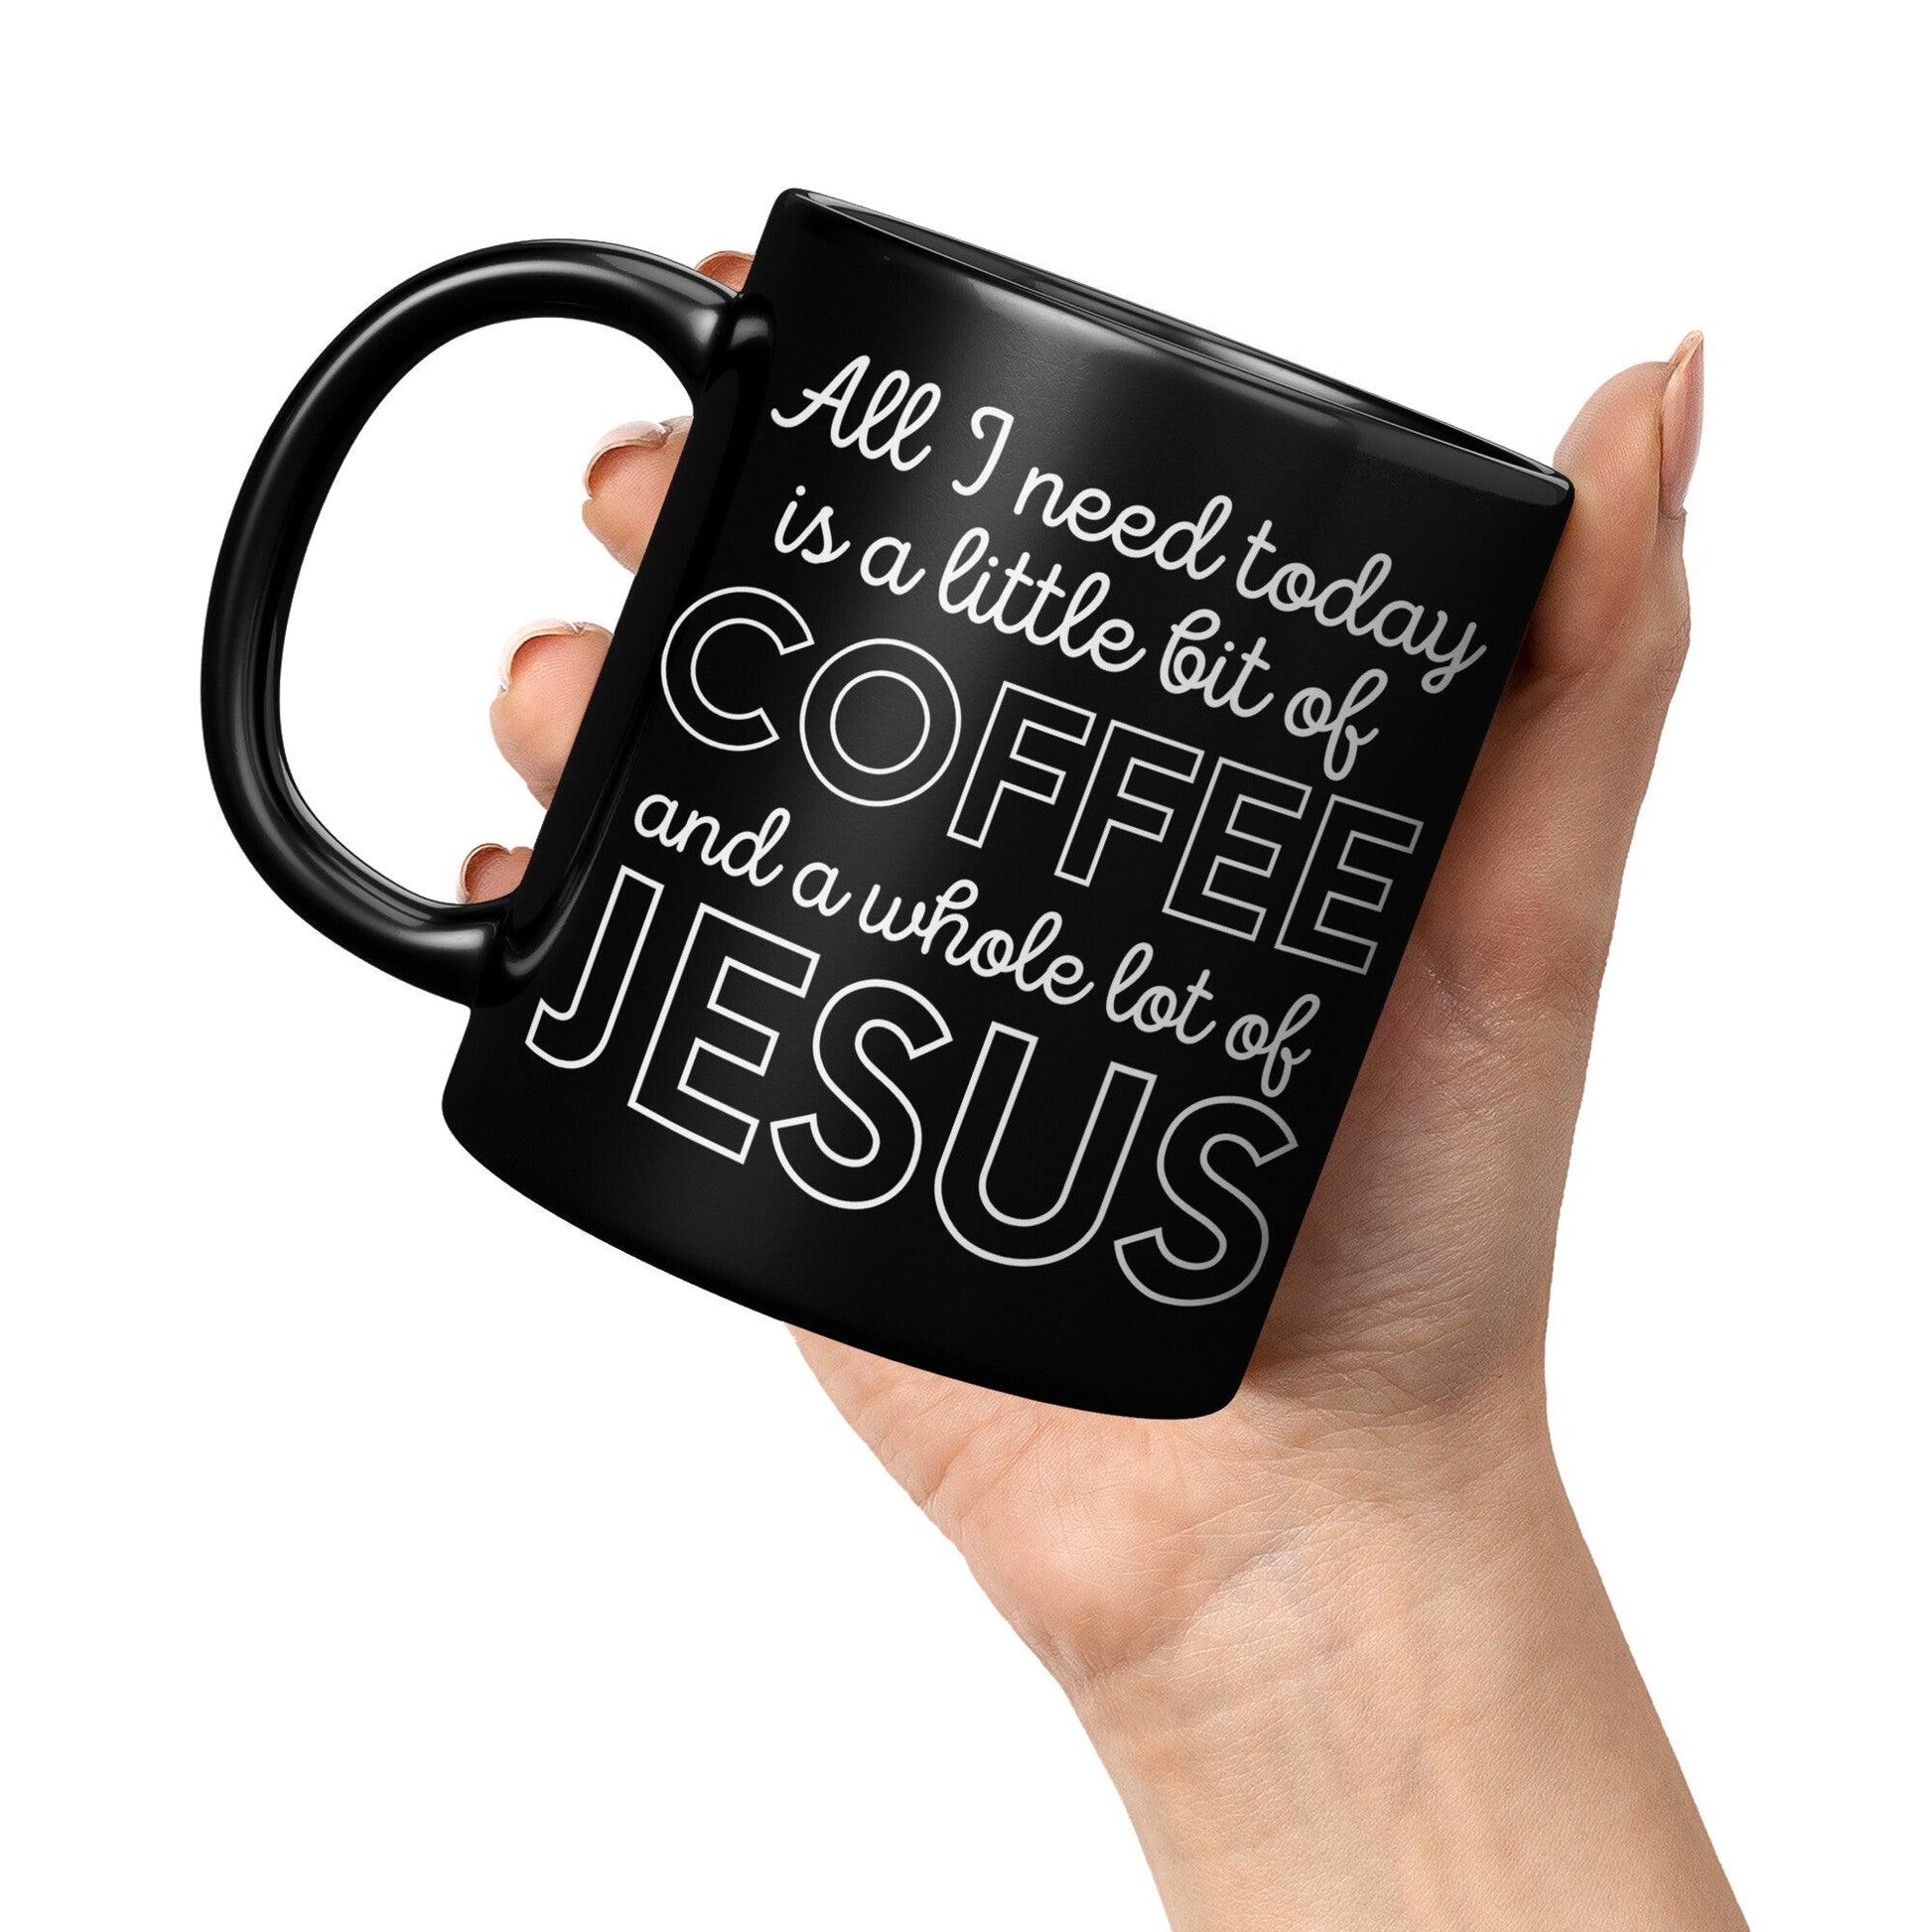 All I Need Today is a Little Bit of Coffee and a Whole Lot of Jesus Black Mug - TheGivenGet